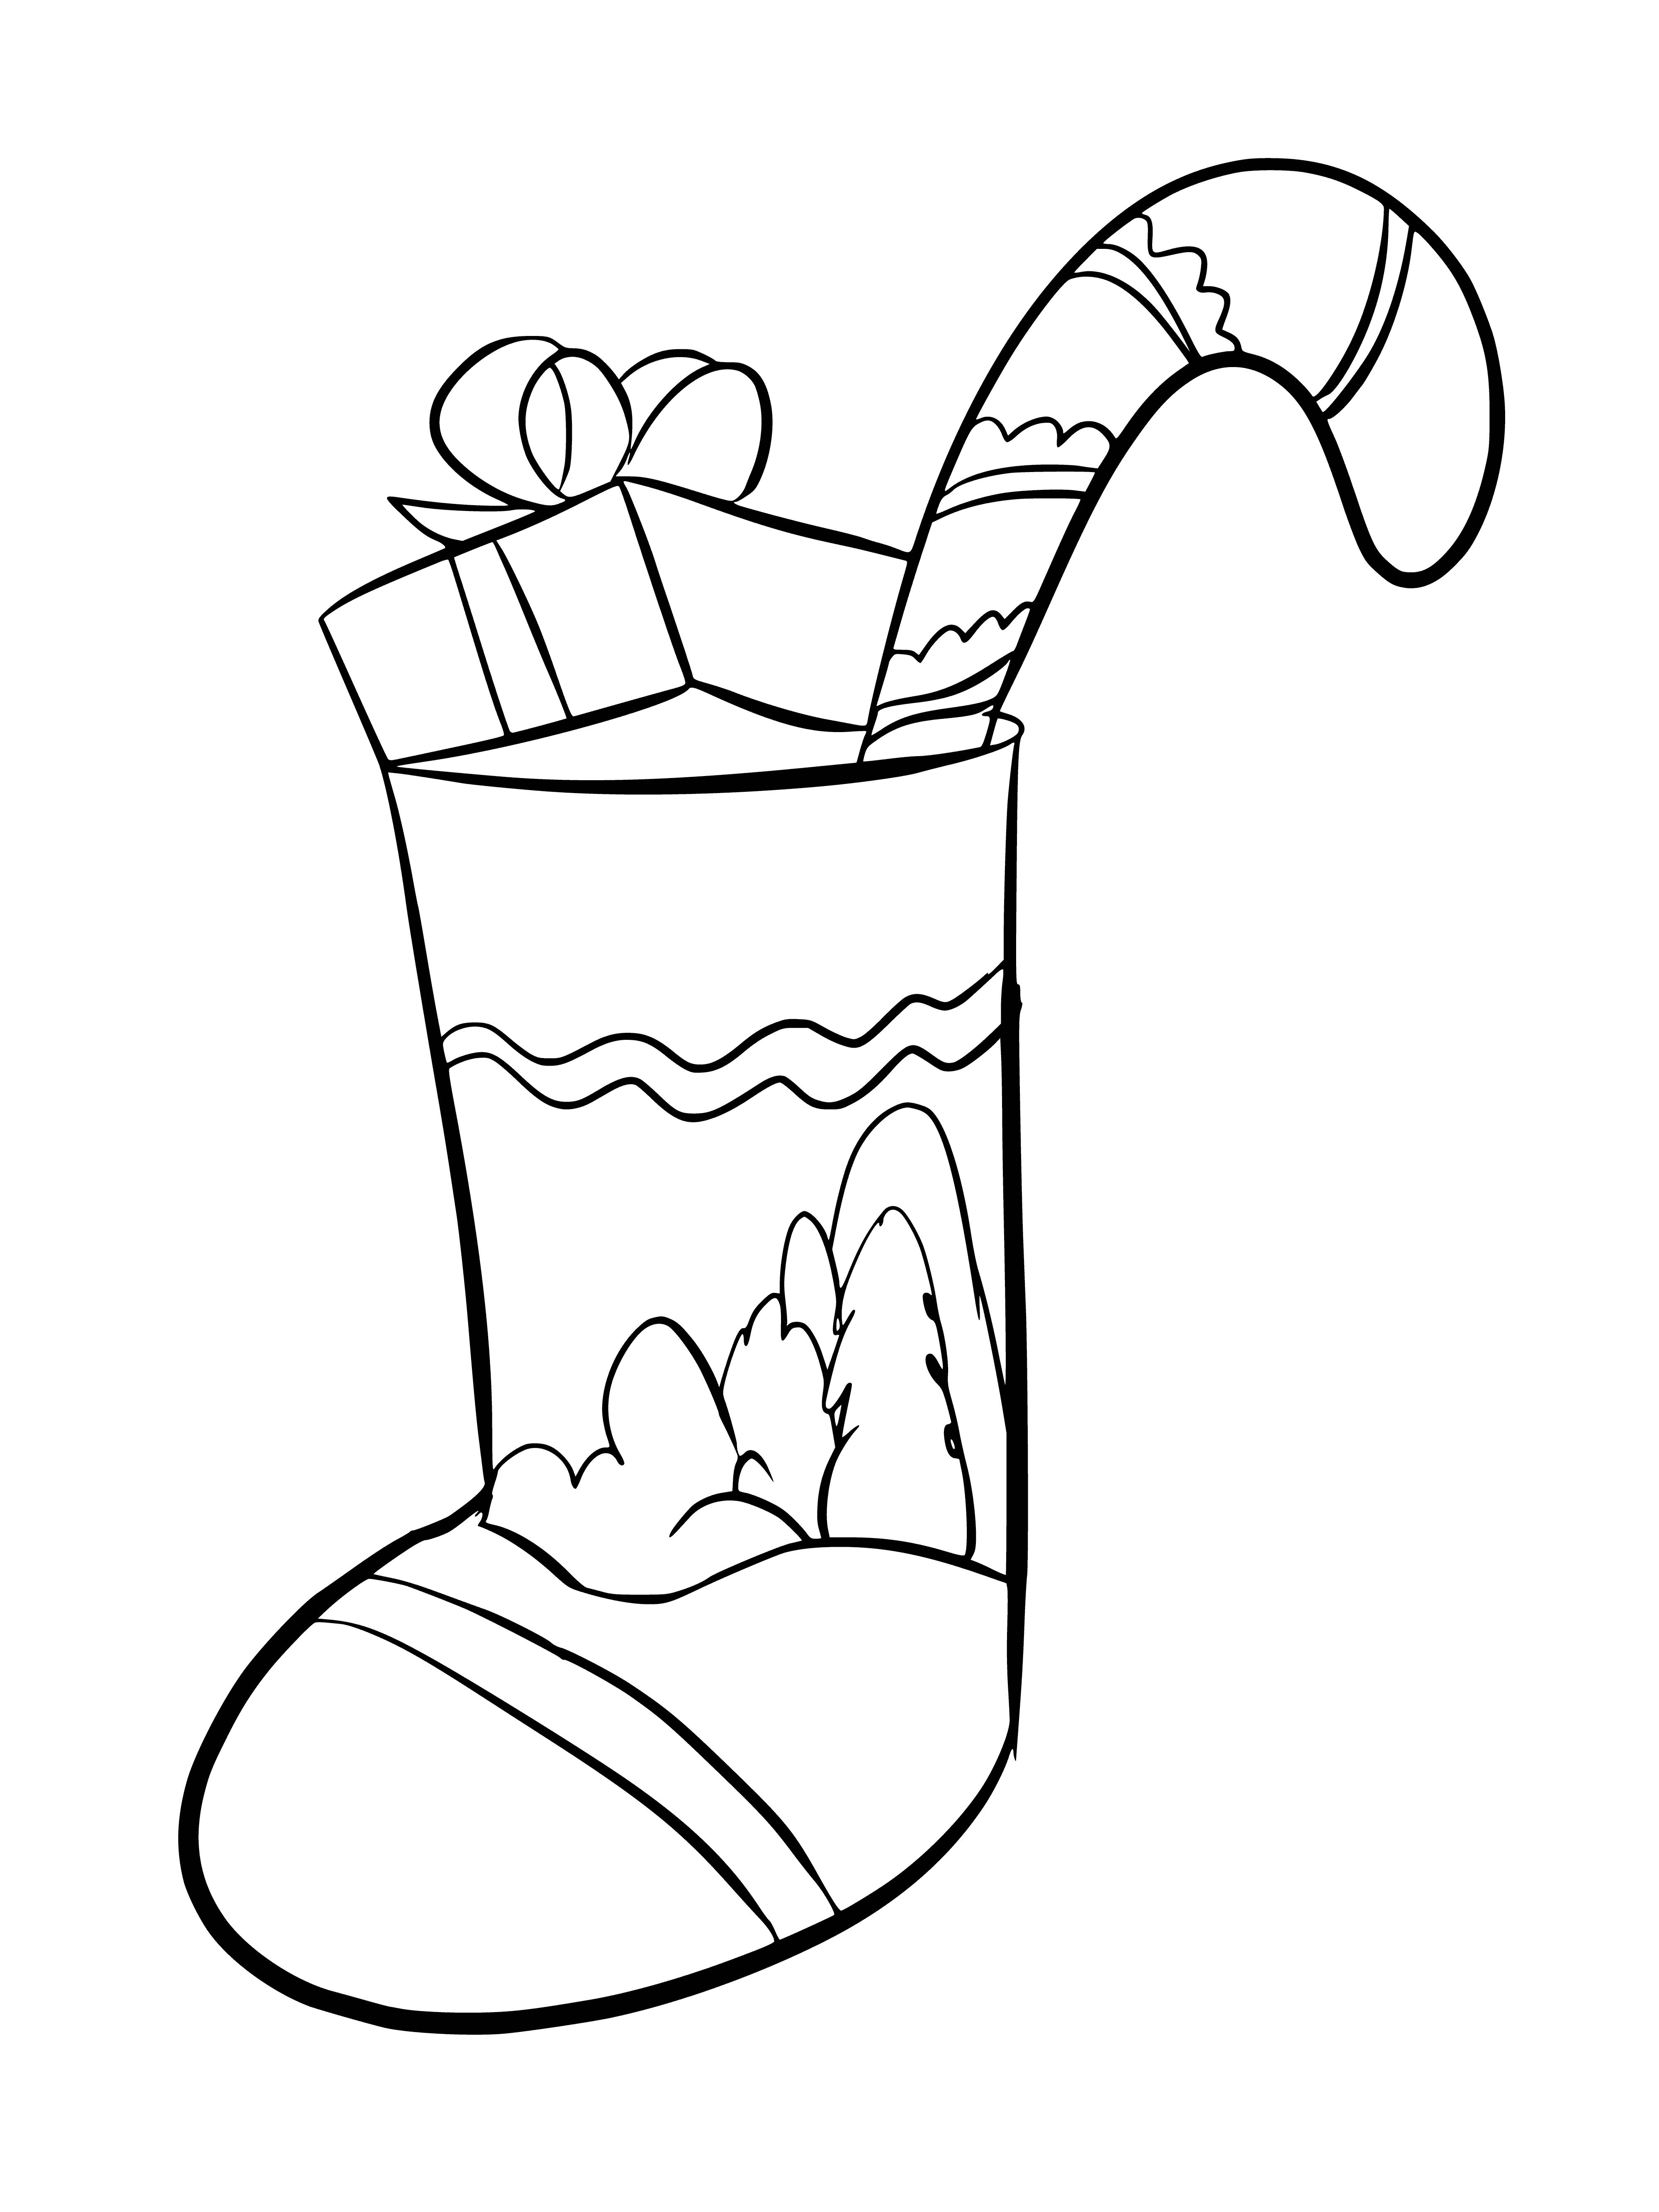 coloring page: White socks with red stripes, snowflake pattern & red cuff.